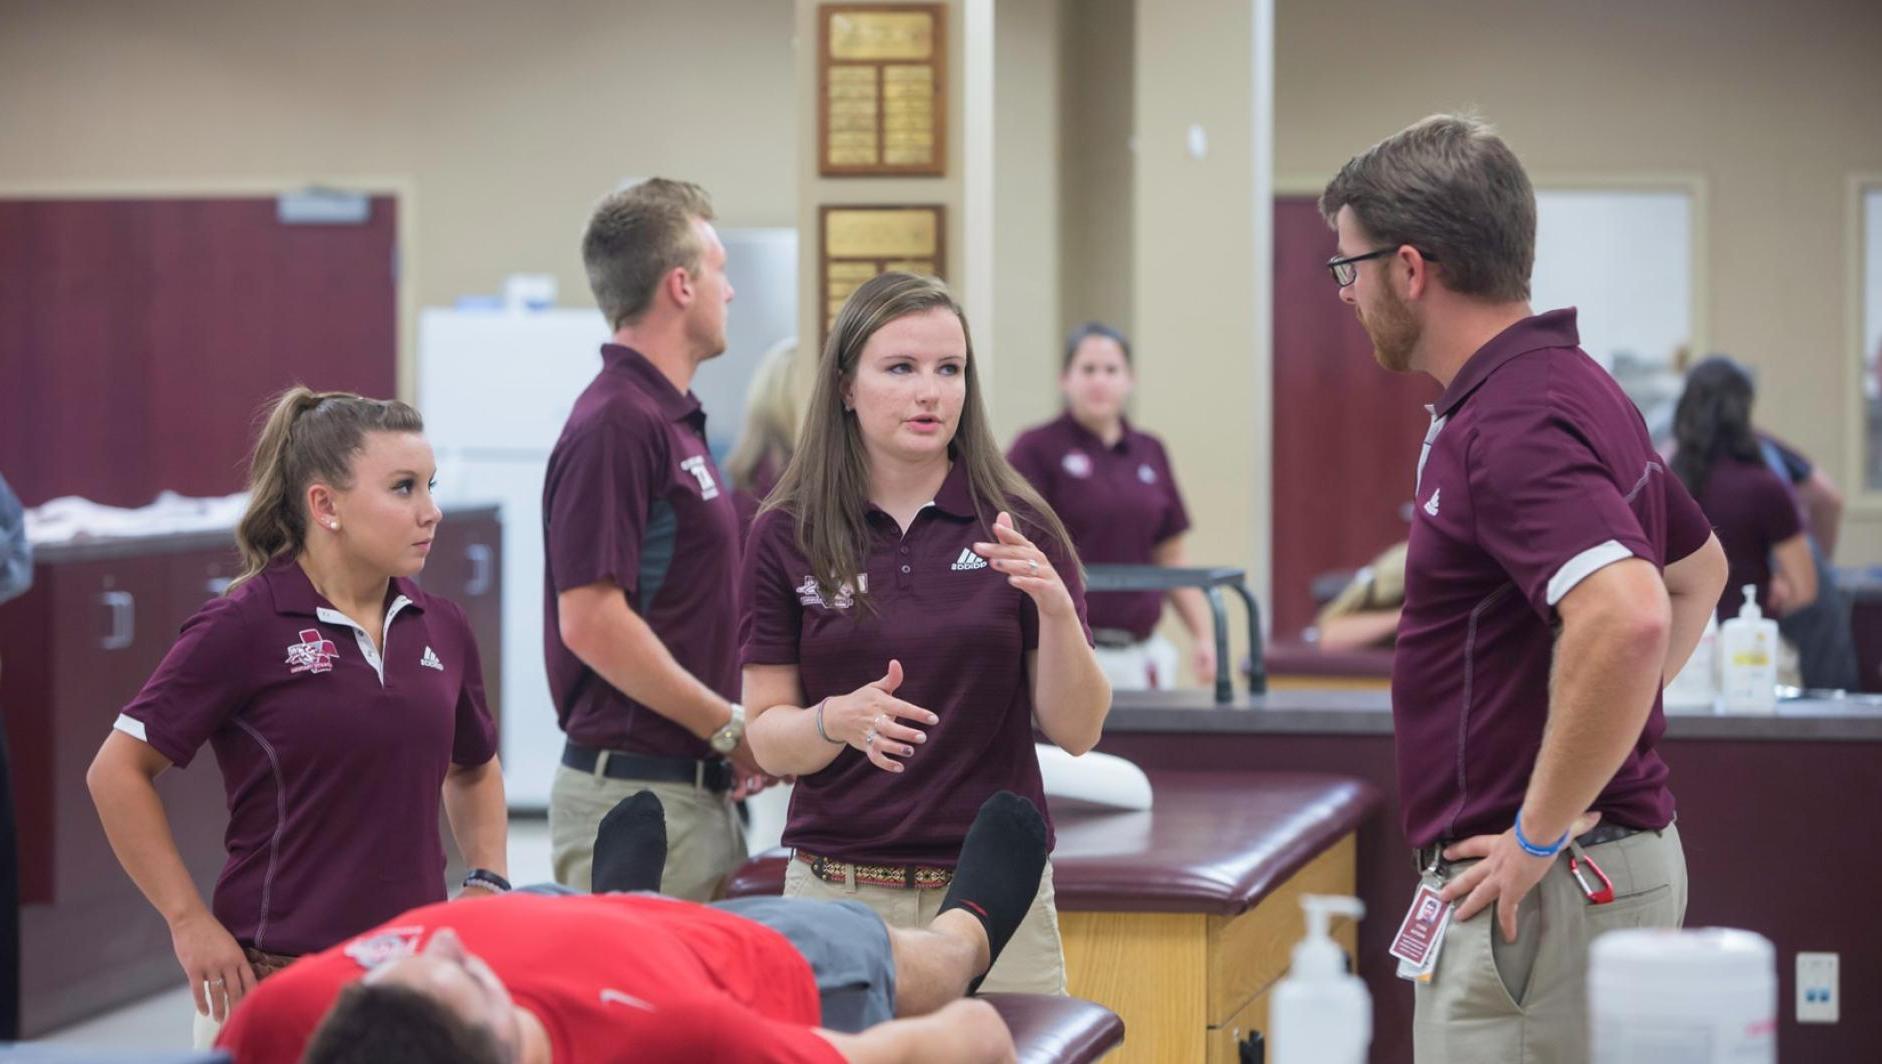 Athletic training students have a discussion about a client in the athletic training facility.